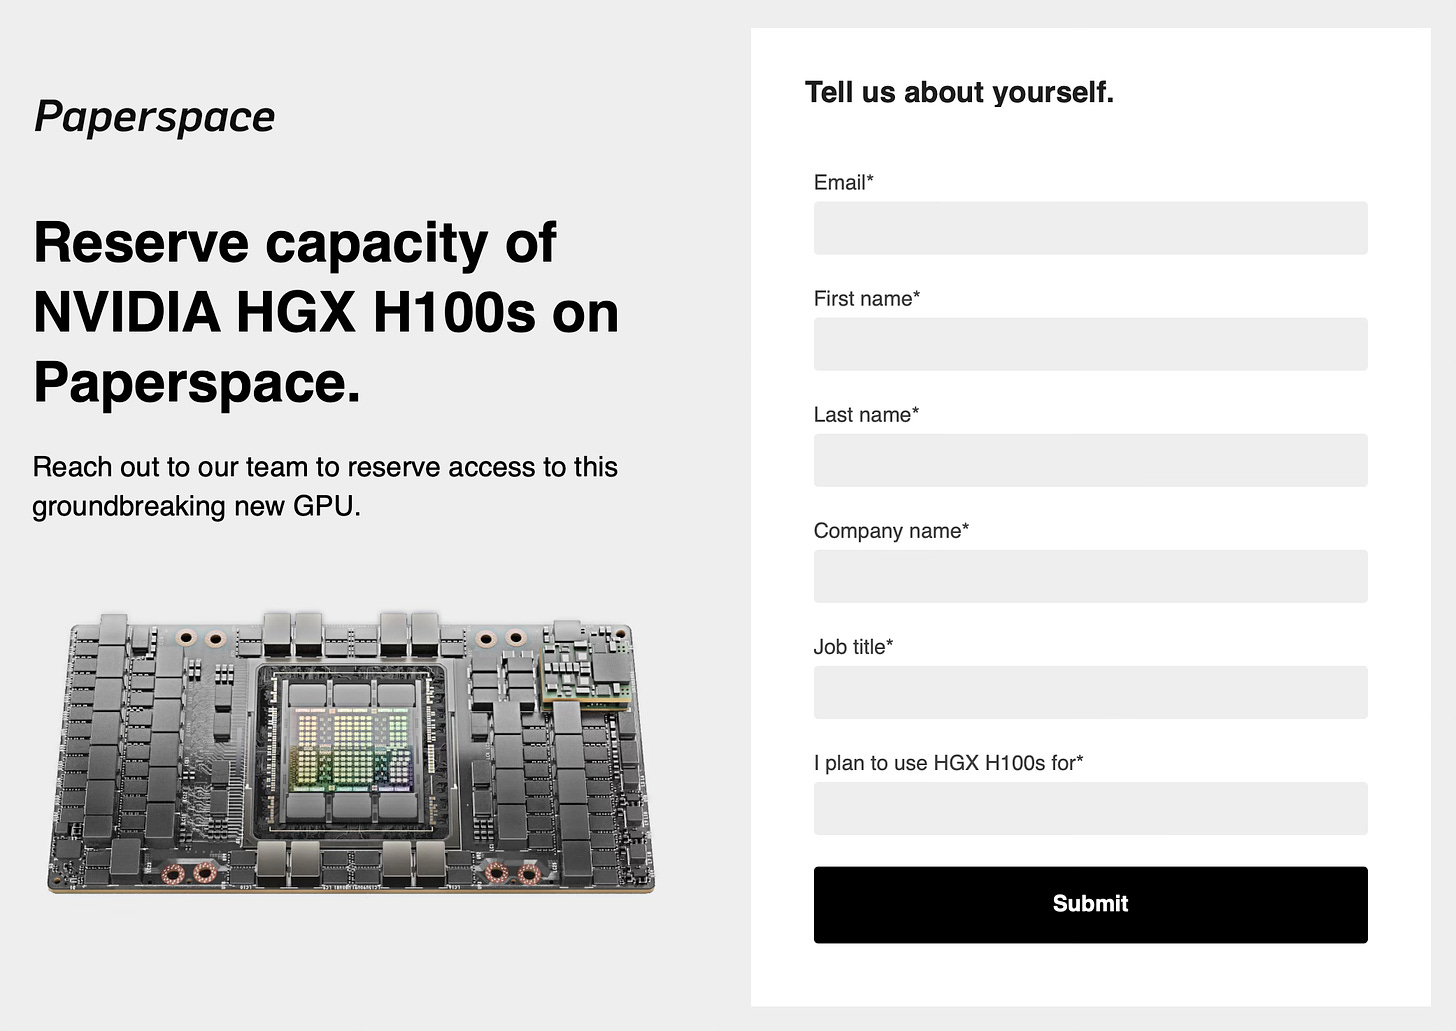 Reserve capacity of NVIDIA HGX H100s on Paperspace.